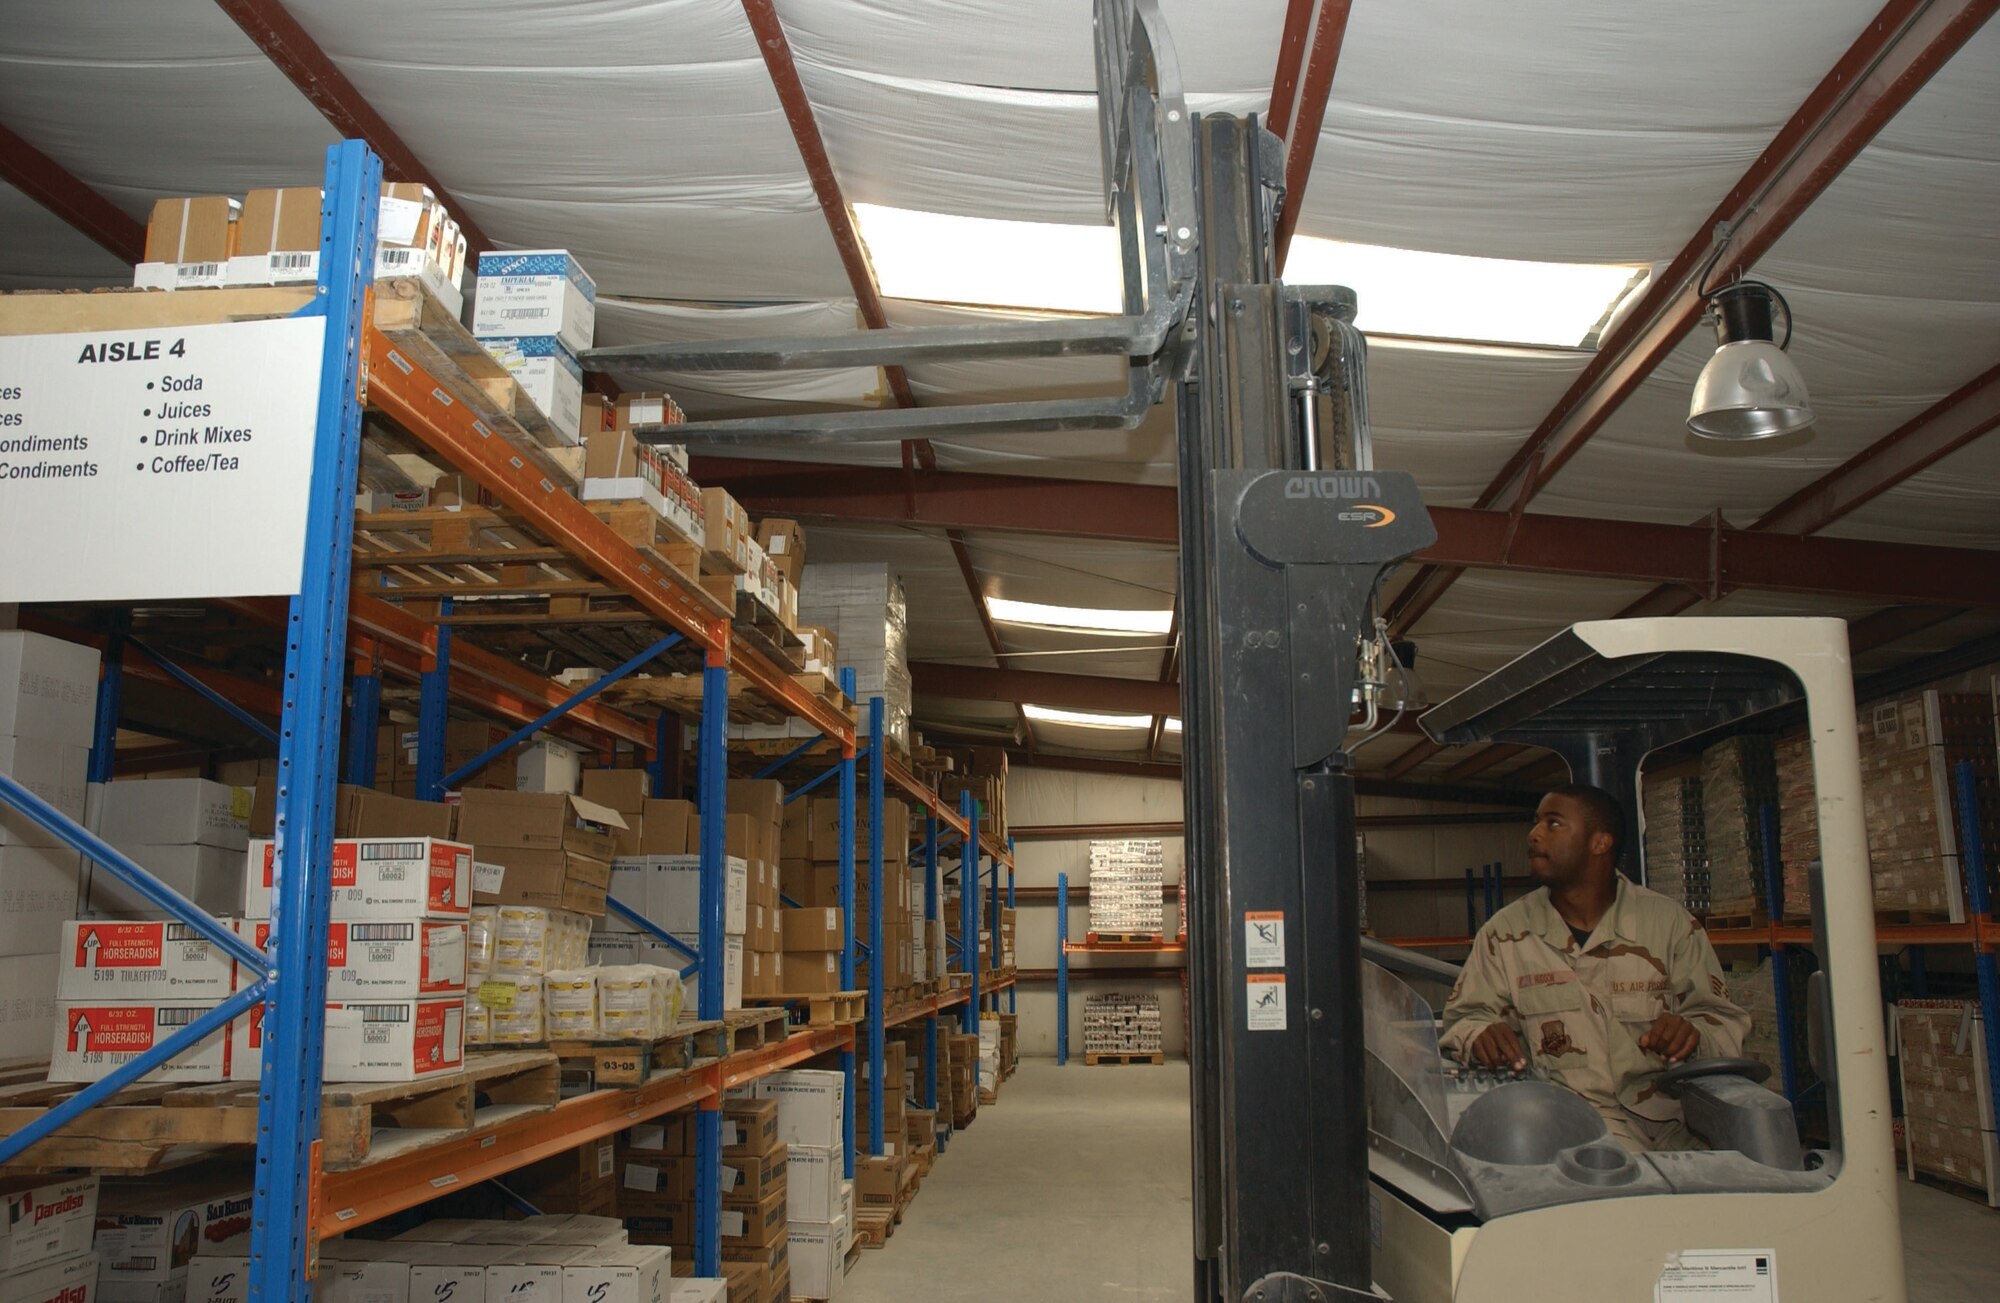 SOUTHWEST ASIA --  While at Al Udeid Air Base, Staff Sgt. Samuel Hudson, from the 325th Services Squadron, organizes a food stock room. (Courtesy photo)